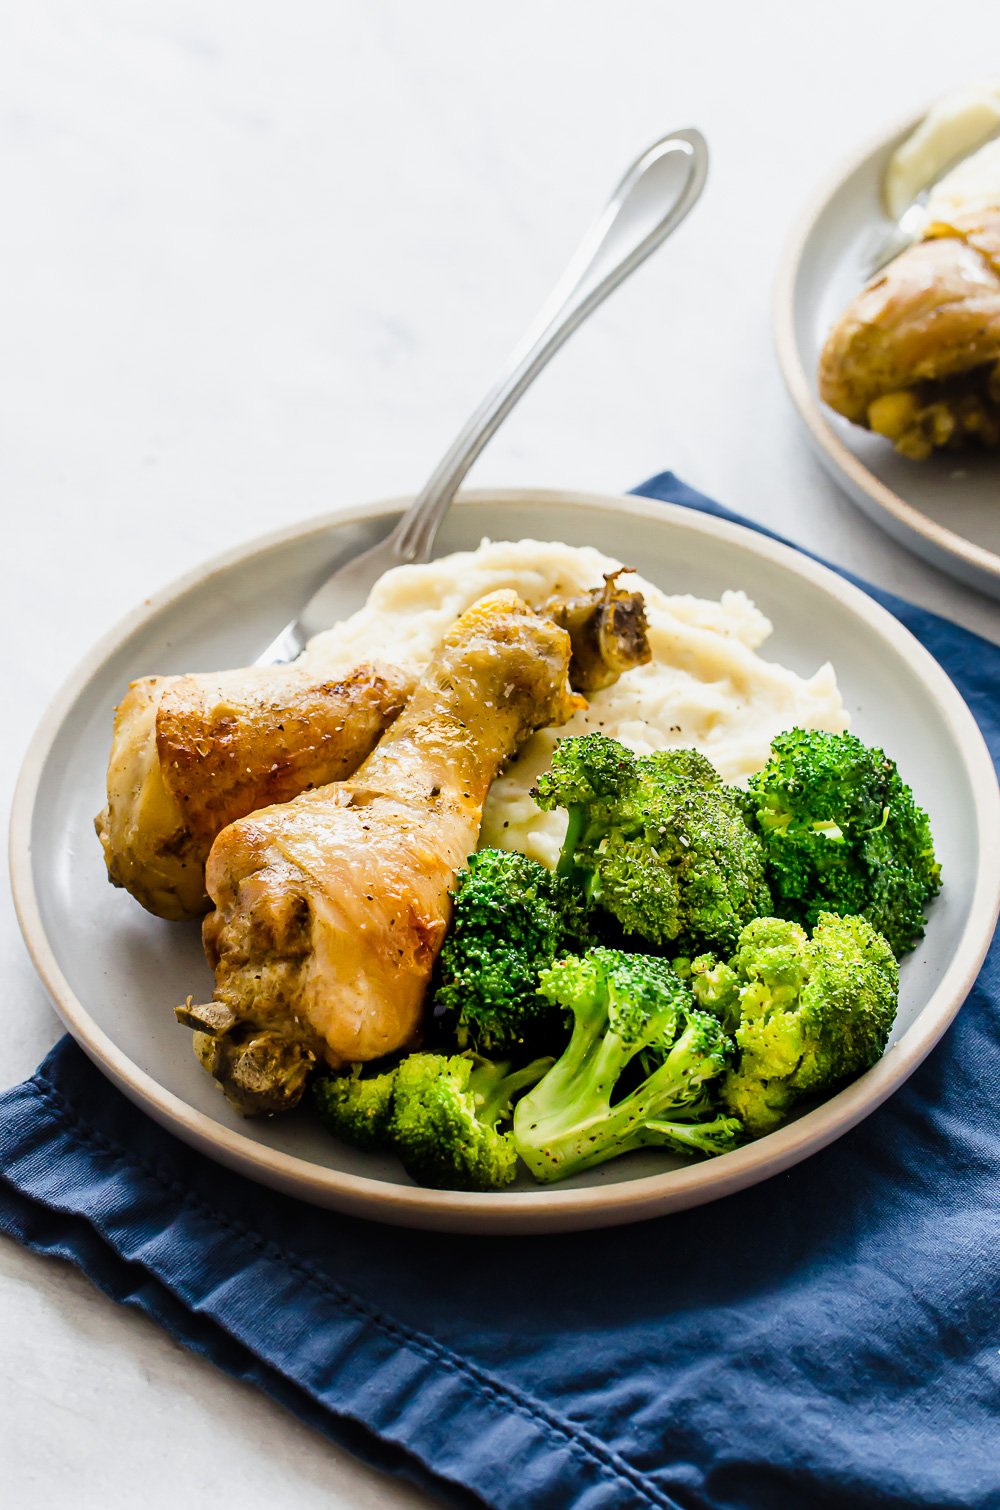 Cooked chicken drumsticks on a plate with broccoli and mashed potatoes.